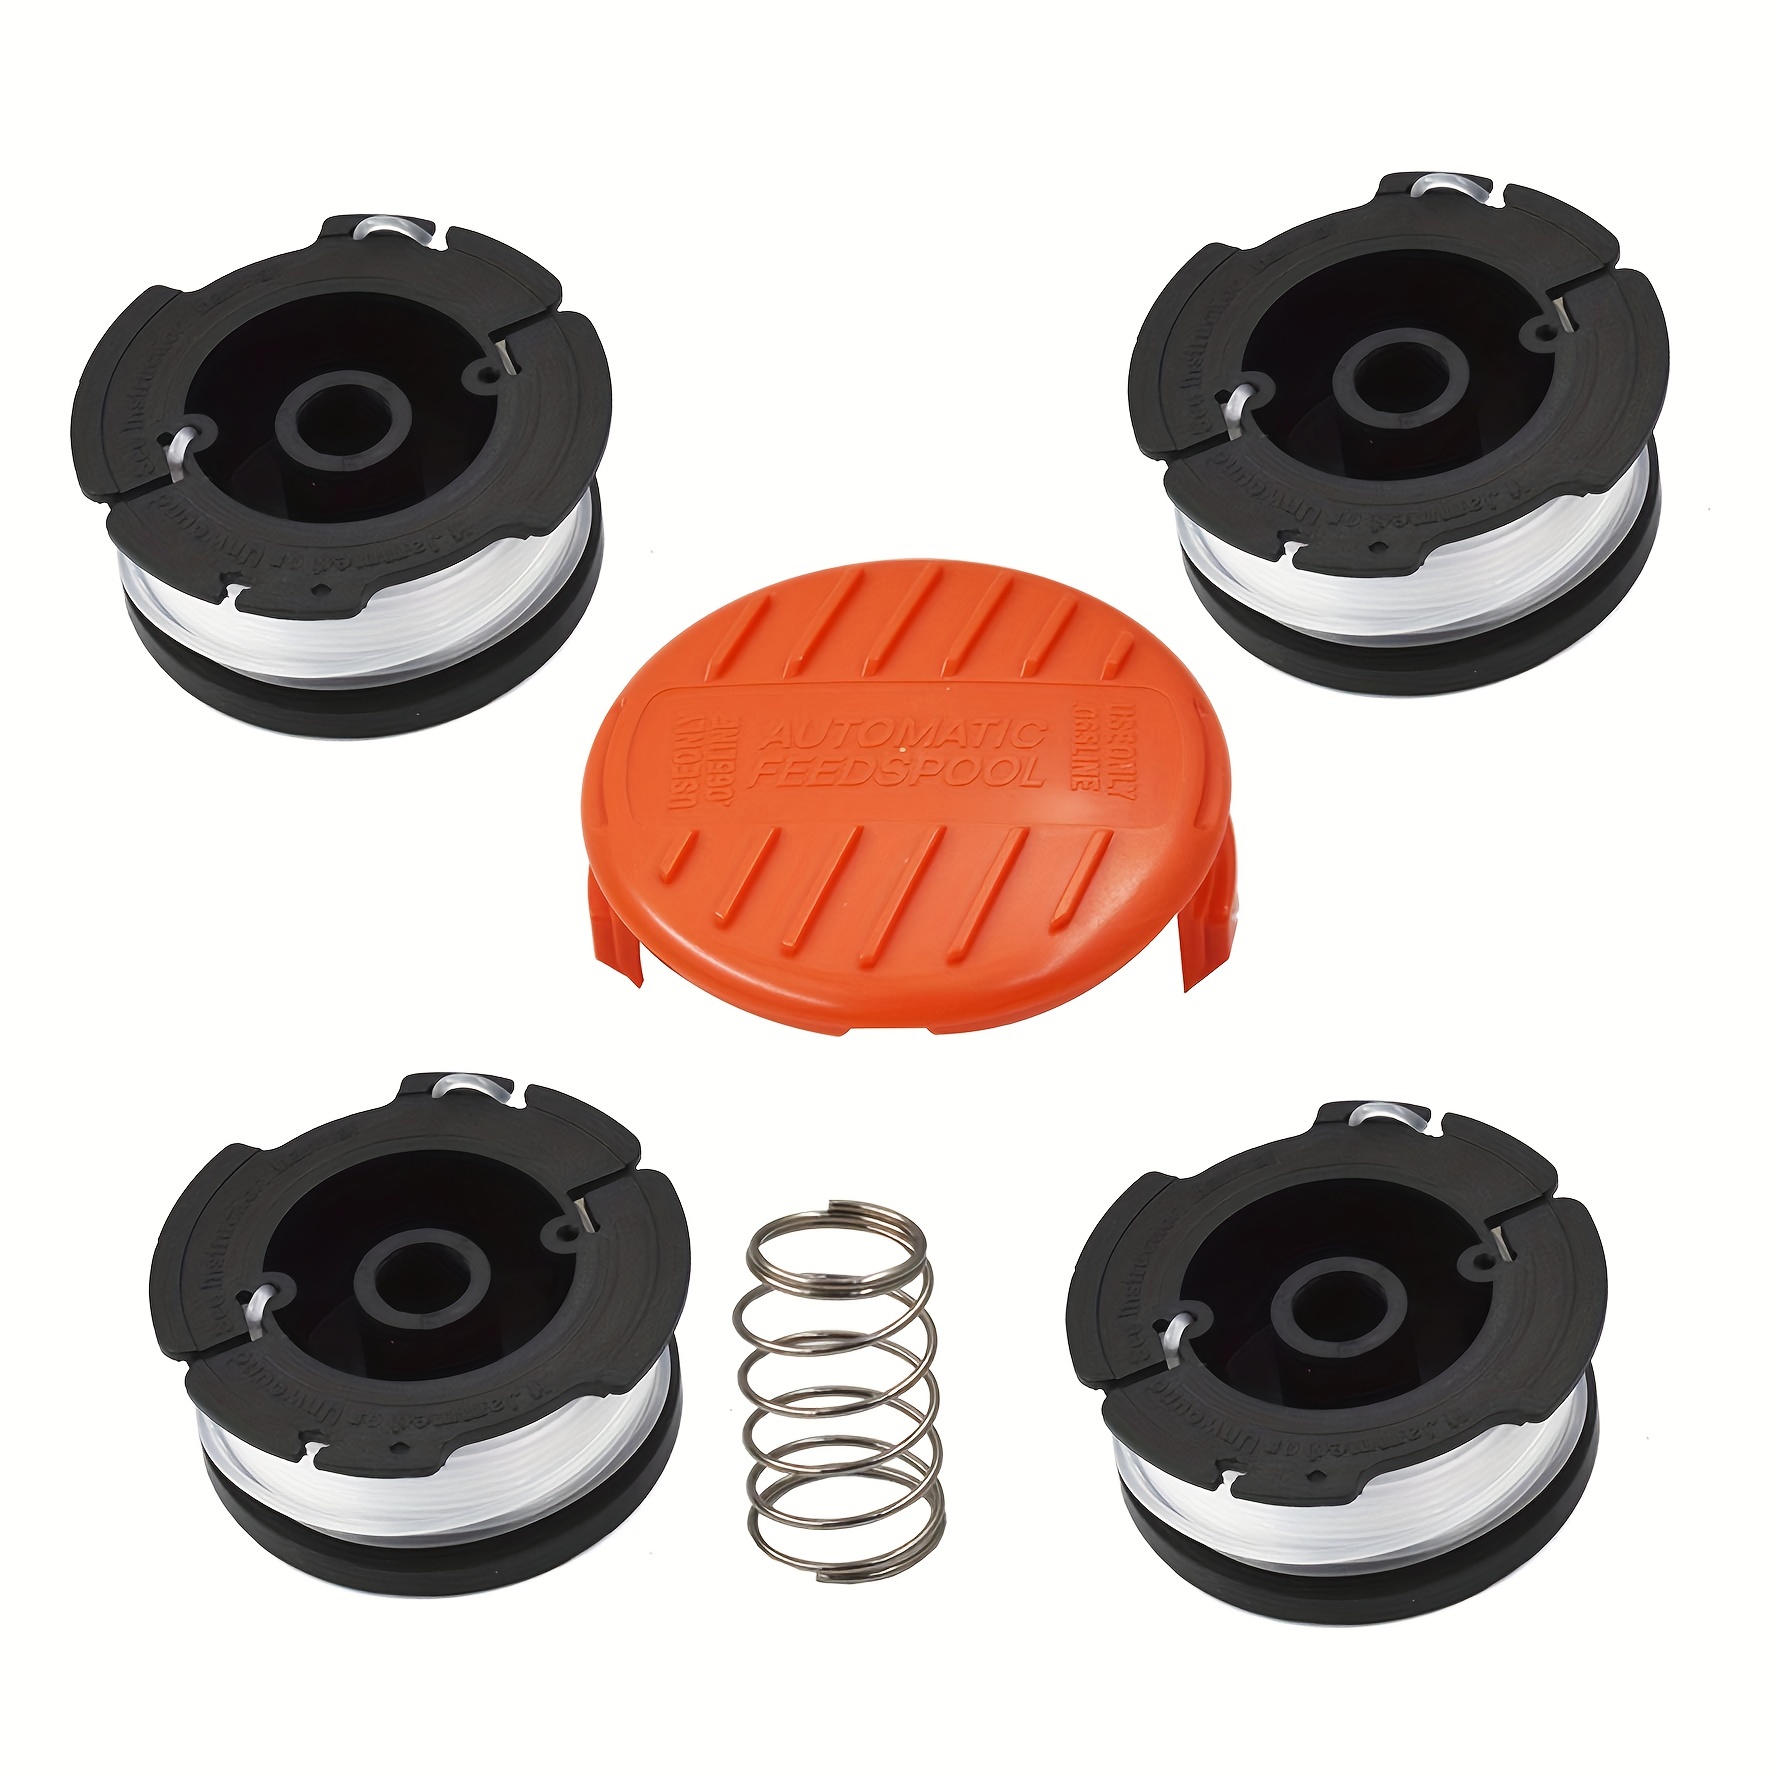 Weed Eater Spool Parts For Black+decker Af-100 With Spool Cap Spring